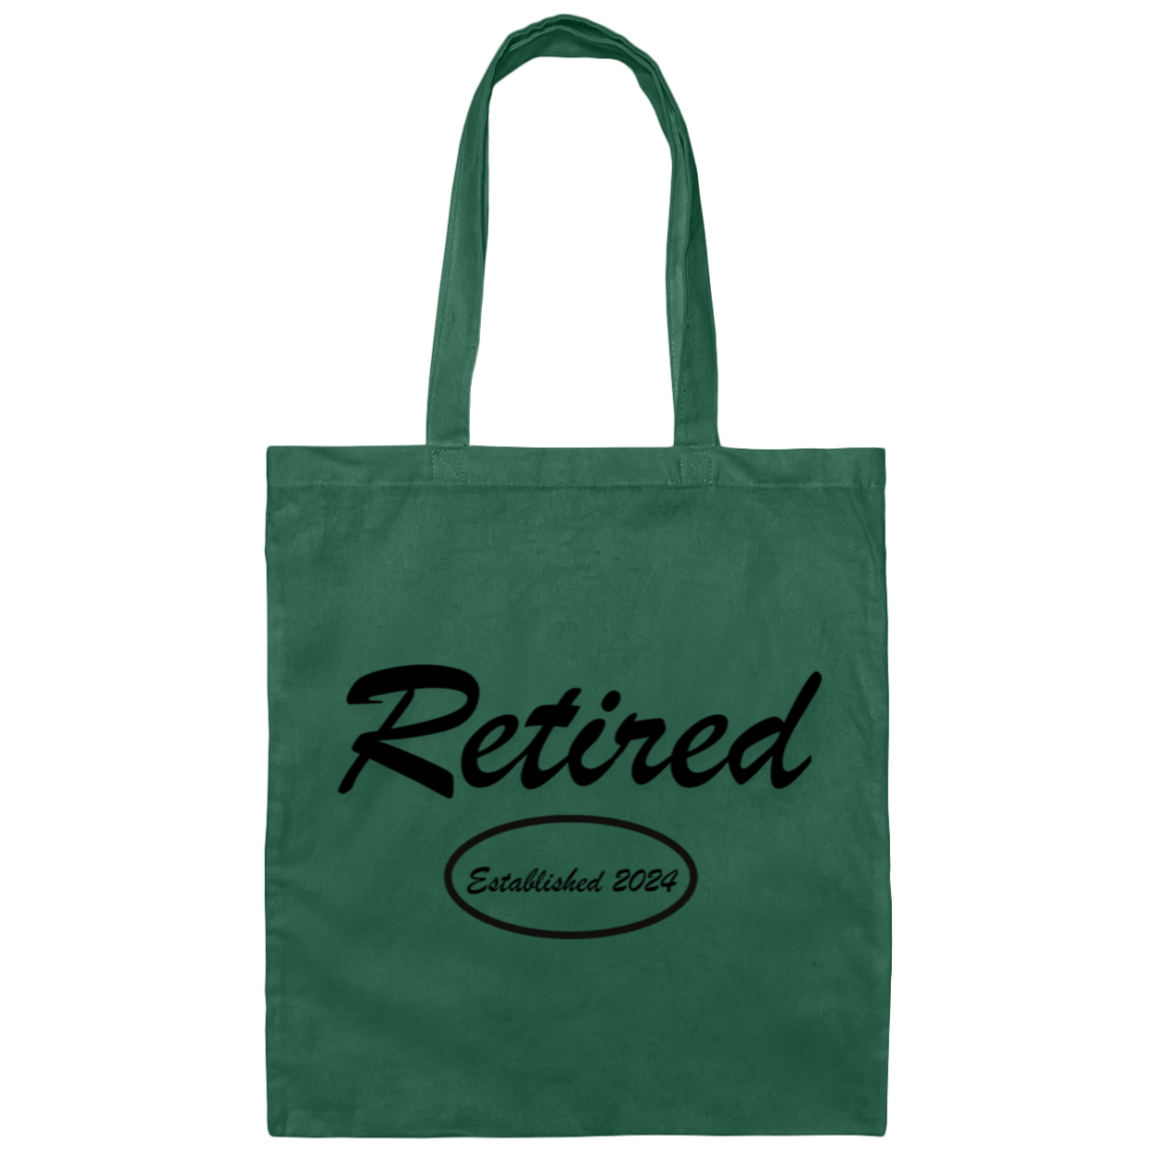 Retired 2024 Tote Bag